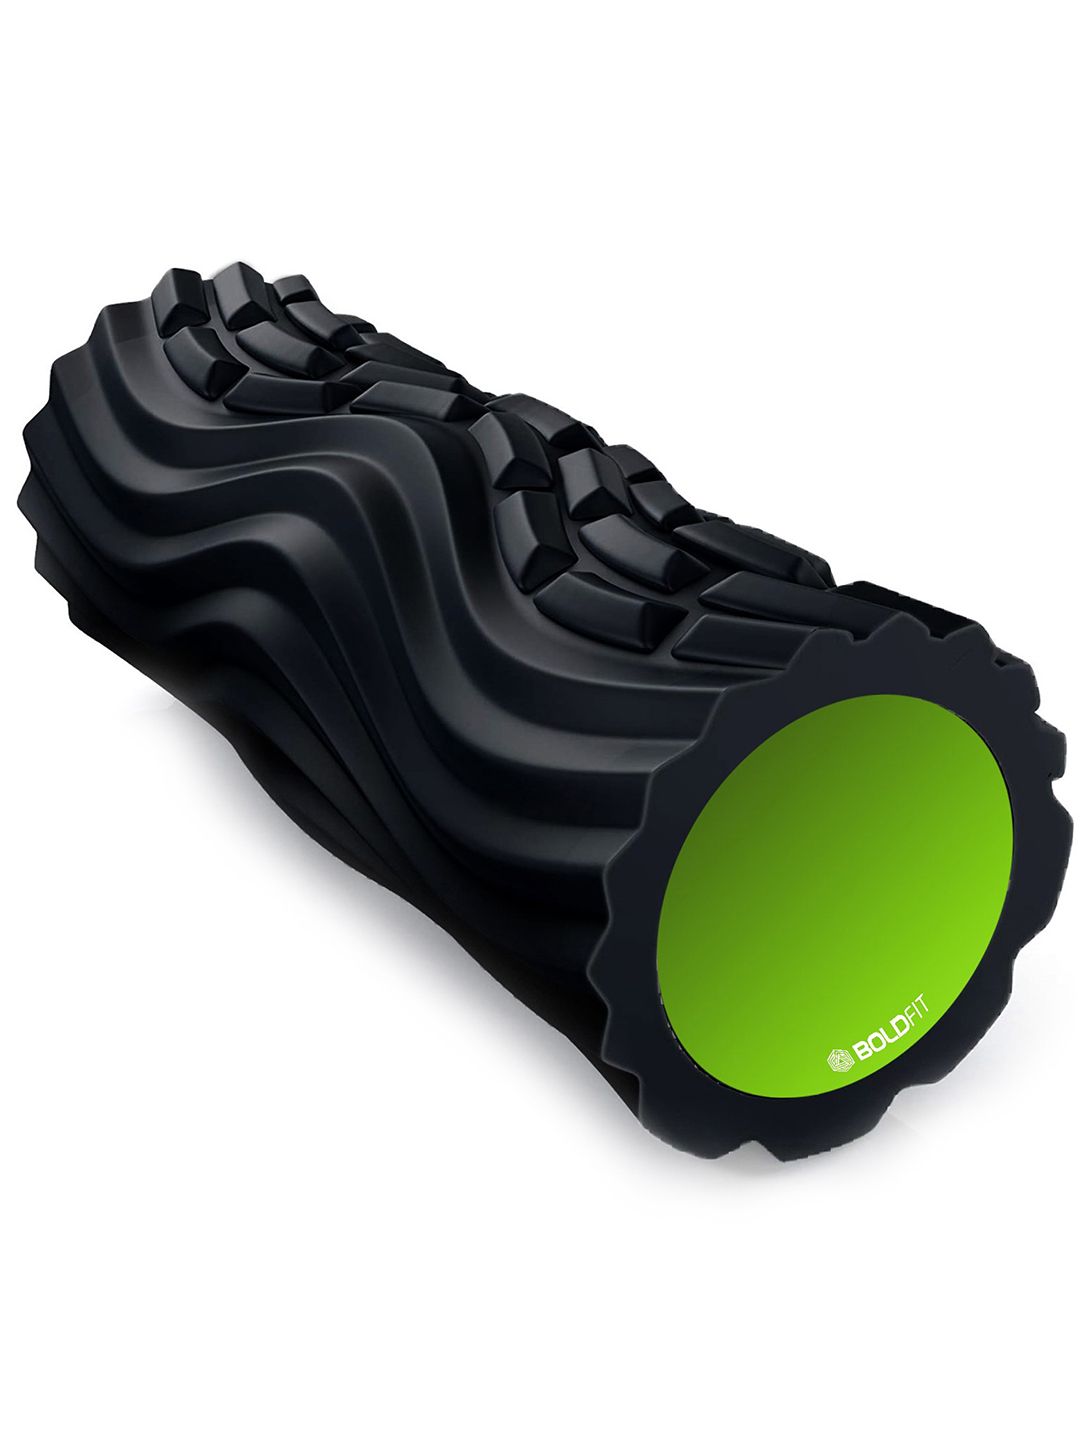 BOLDFIT  Black & Green Foam Roller For Deep Tissue Massage Price in India